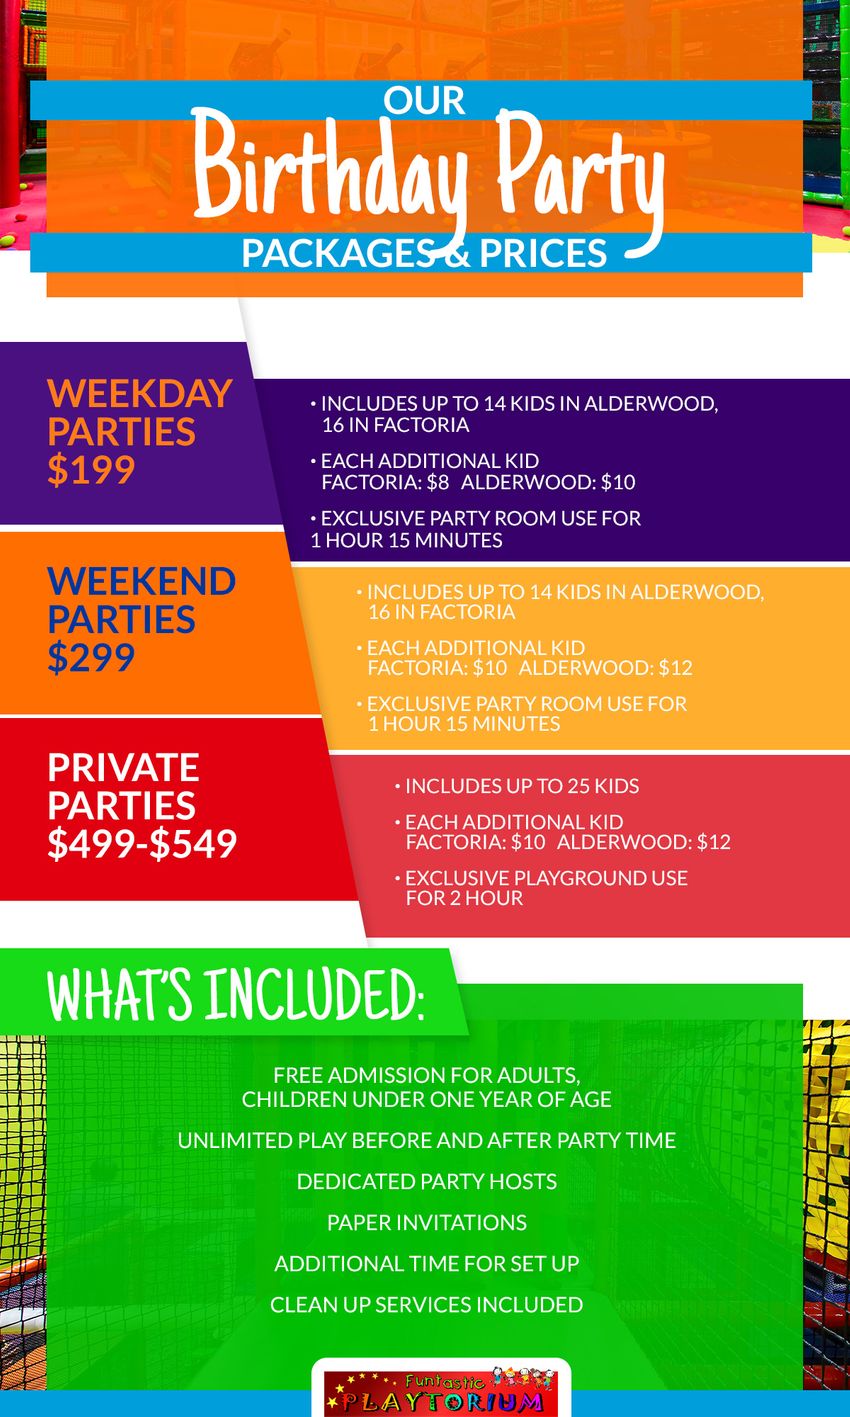 funtastic-infographic-birthdaypartypackages-5bbb8209887c9.jpg